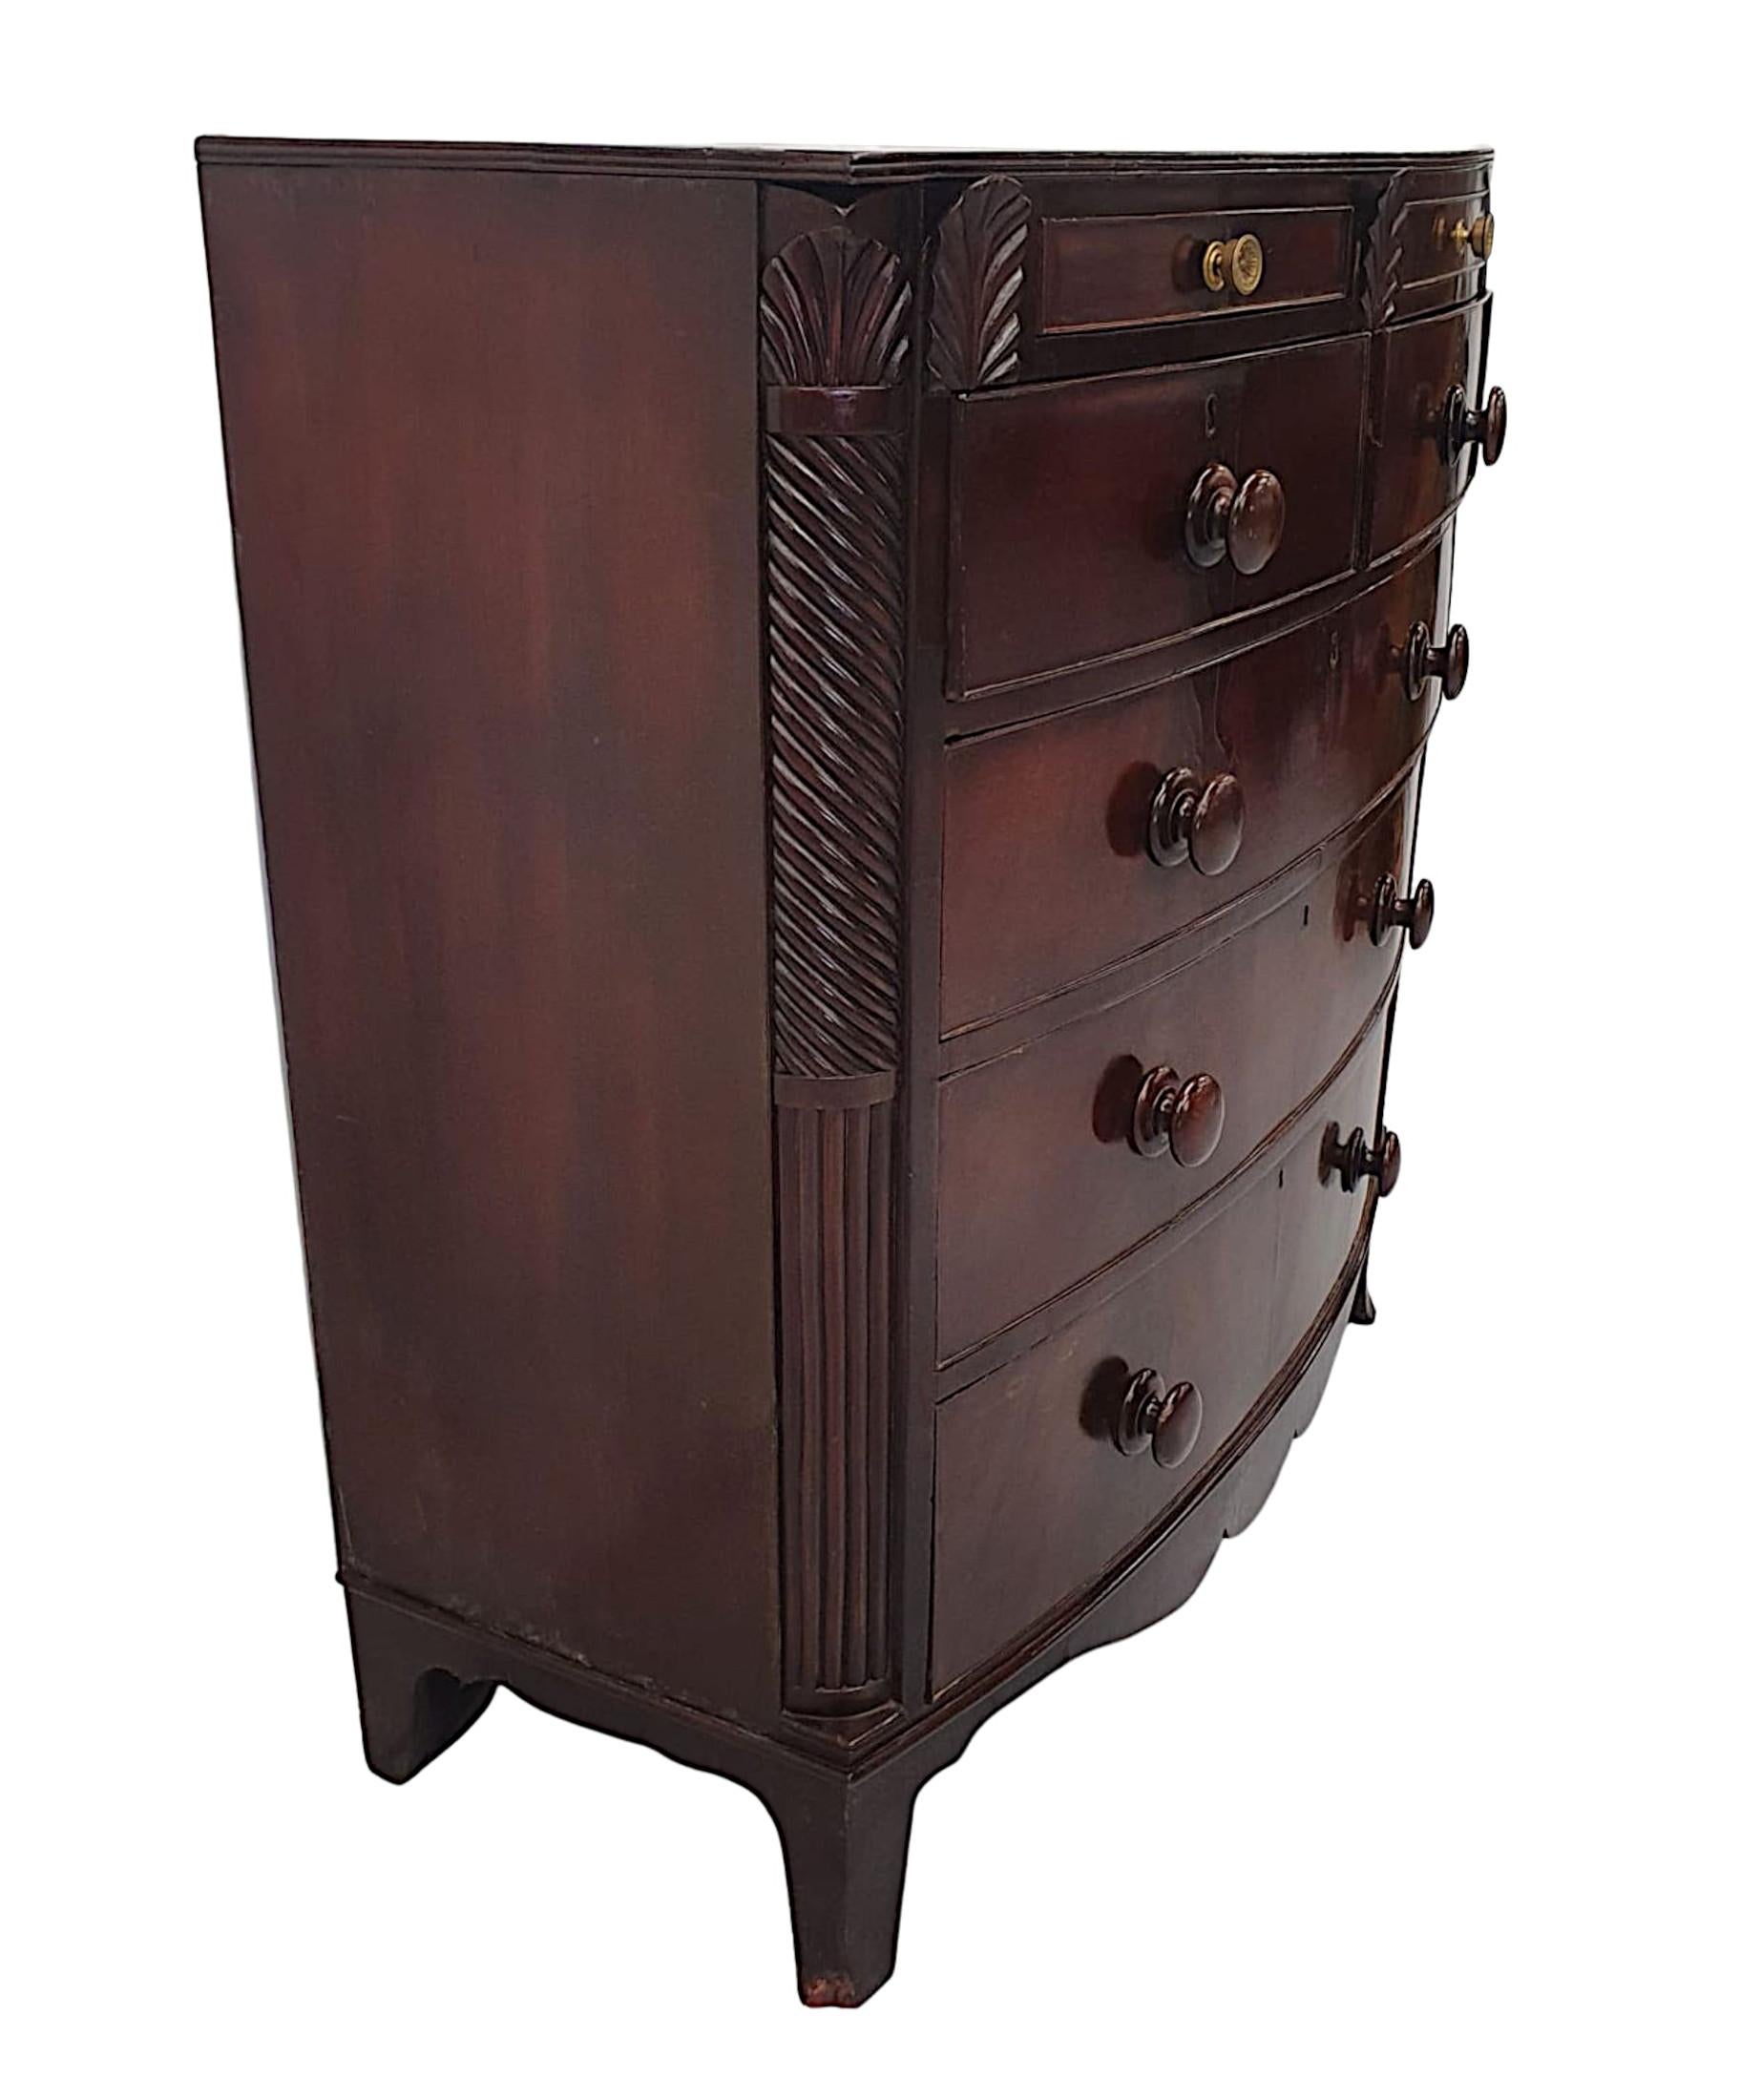 A gorgeous 19th Century bow front mahogany chest of drawers, finely hand carved, richly patinated and in lovely original condition. The moulded top with reeded edge raised over frieze with beautifully carved palmette motif detail and with two single